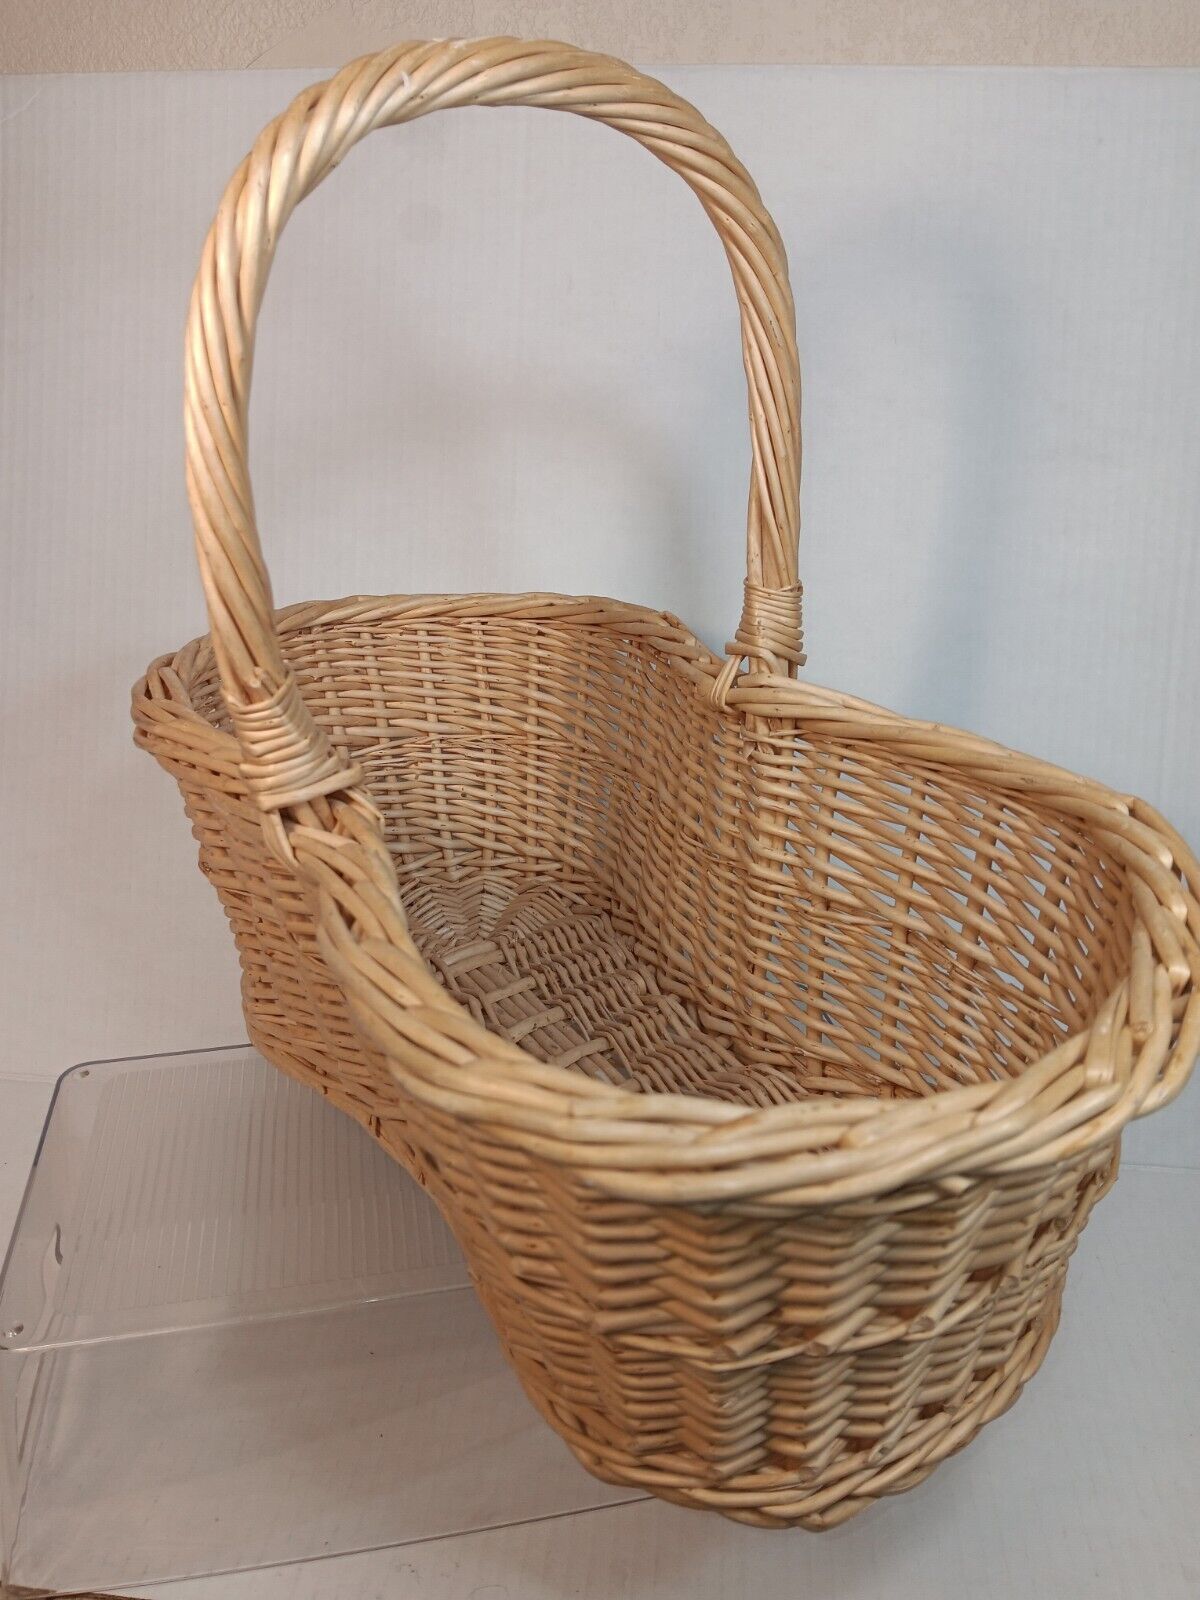 Vtg Wicker Basket French Country Style Twist Handle Sturdy 